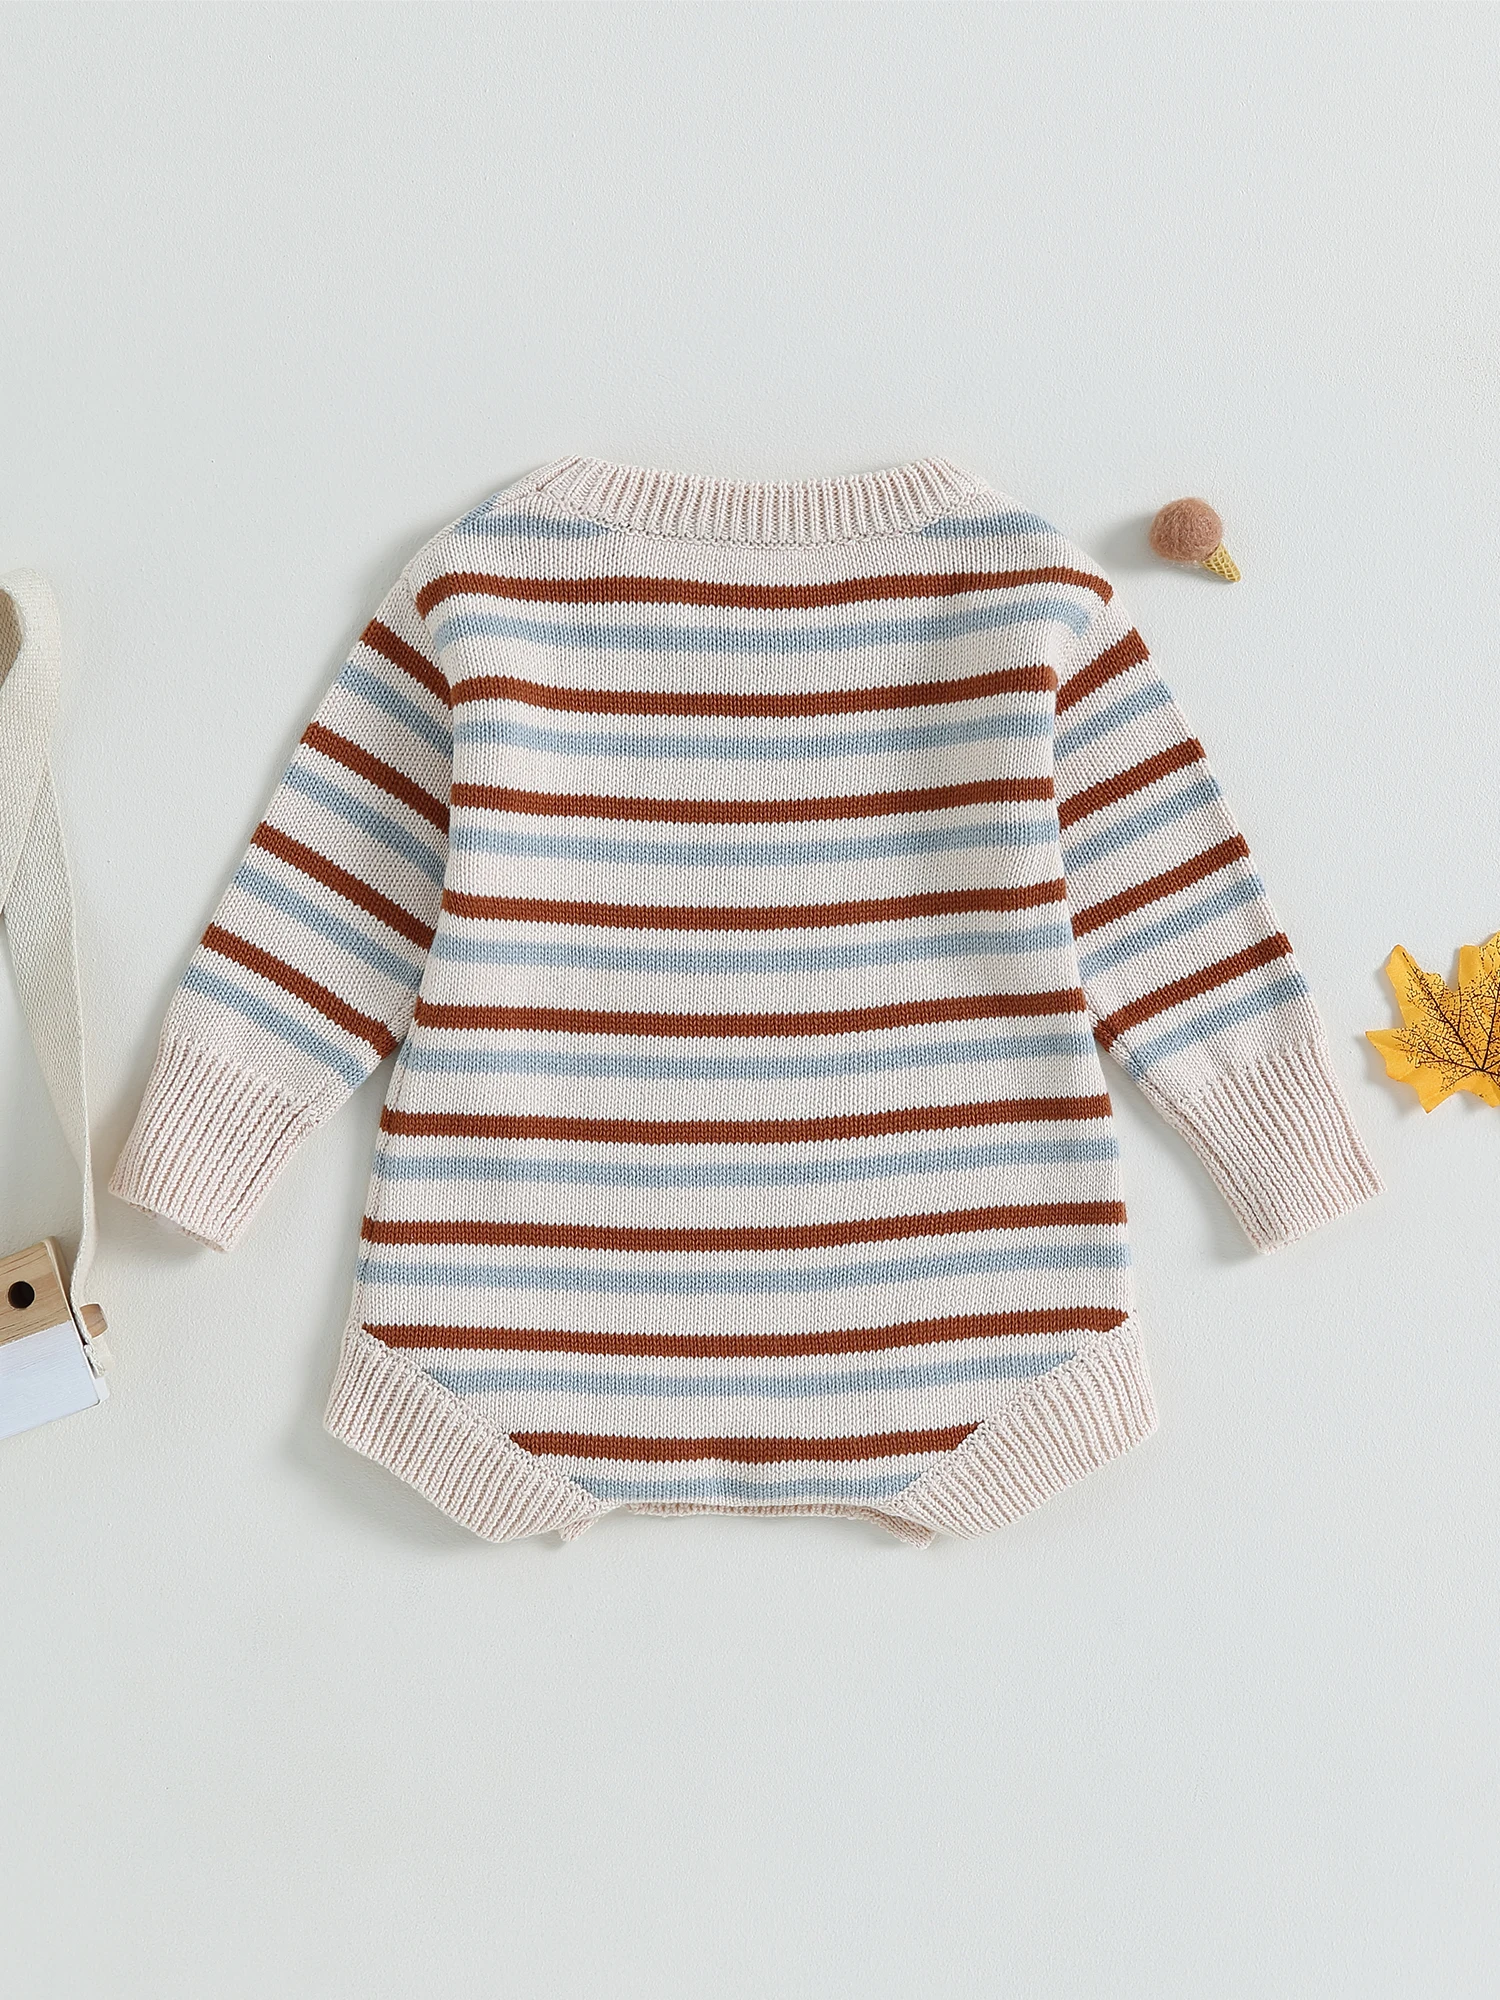 

Adorable Baby Girl Autumn Outfit Long Sleeve Striped Romper with Crewneck - Perfect Newborn Toddler Clothes for Fall Season